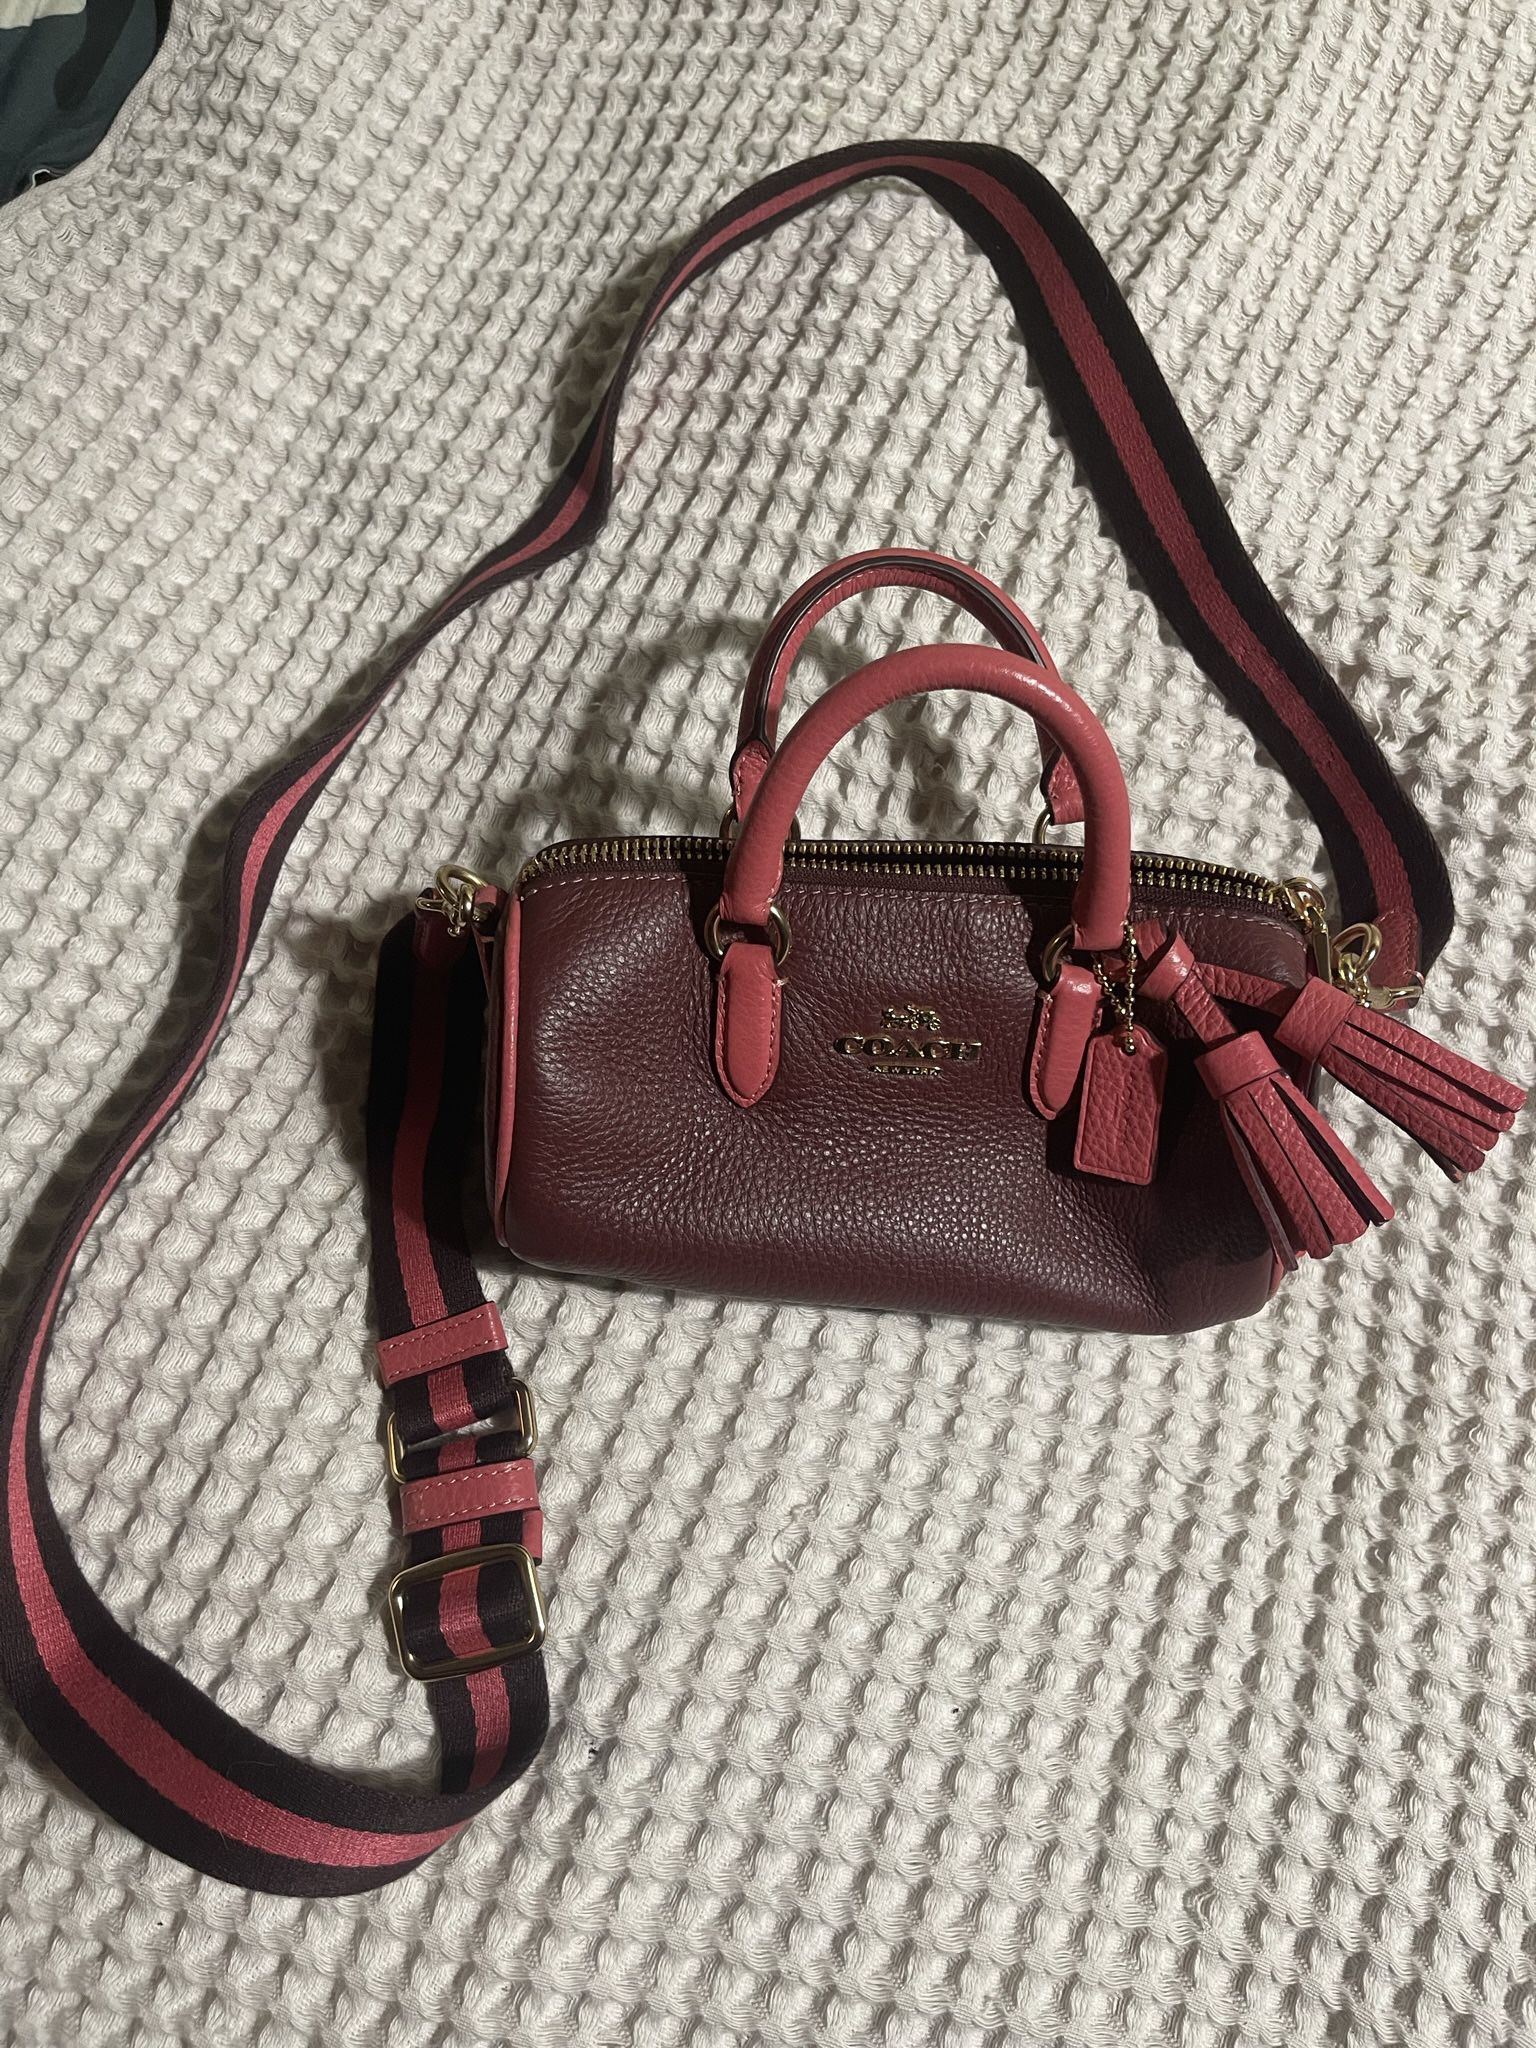 Coach - Burgundy And Pink Purse